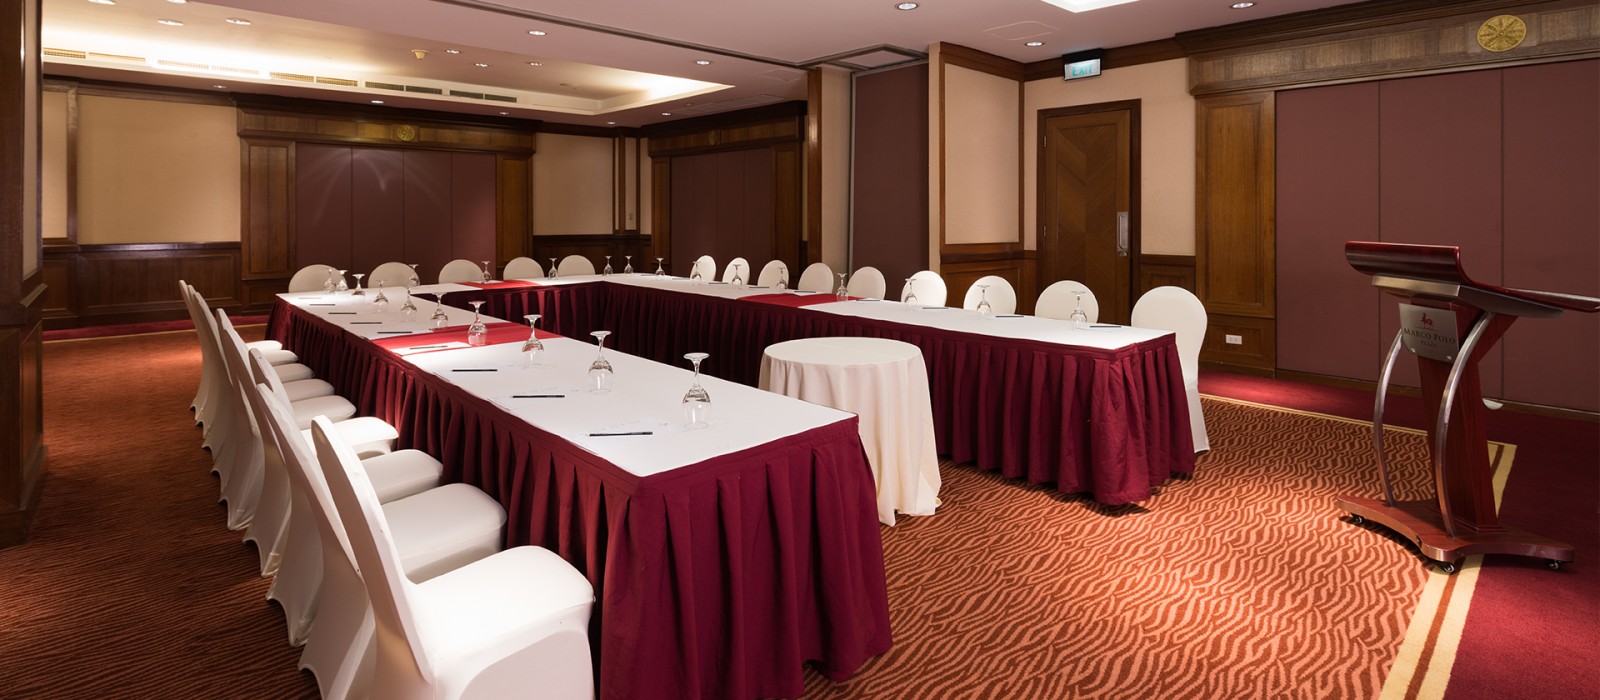 For occasions requiring an intimate space, the Seoul Room is perfect for board or high-level meetings, and supported by modern audio-visual facilities.